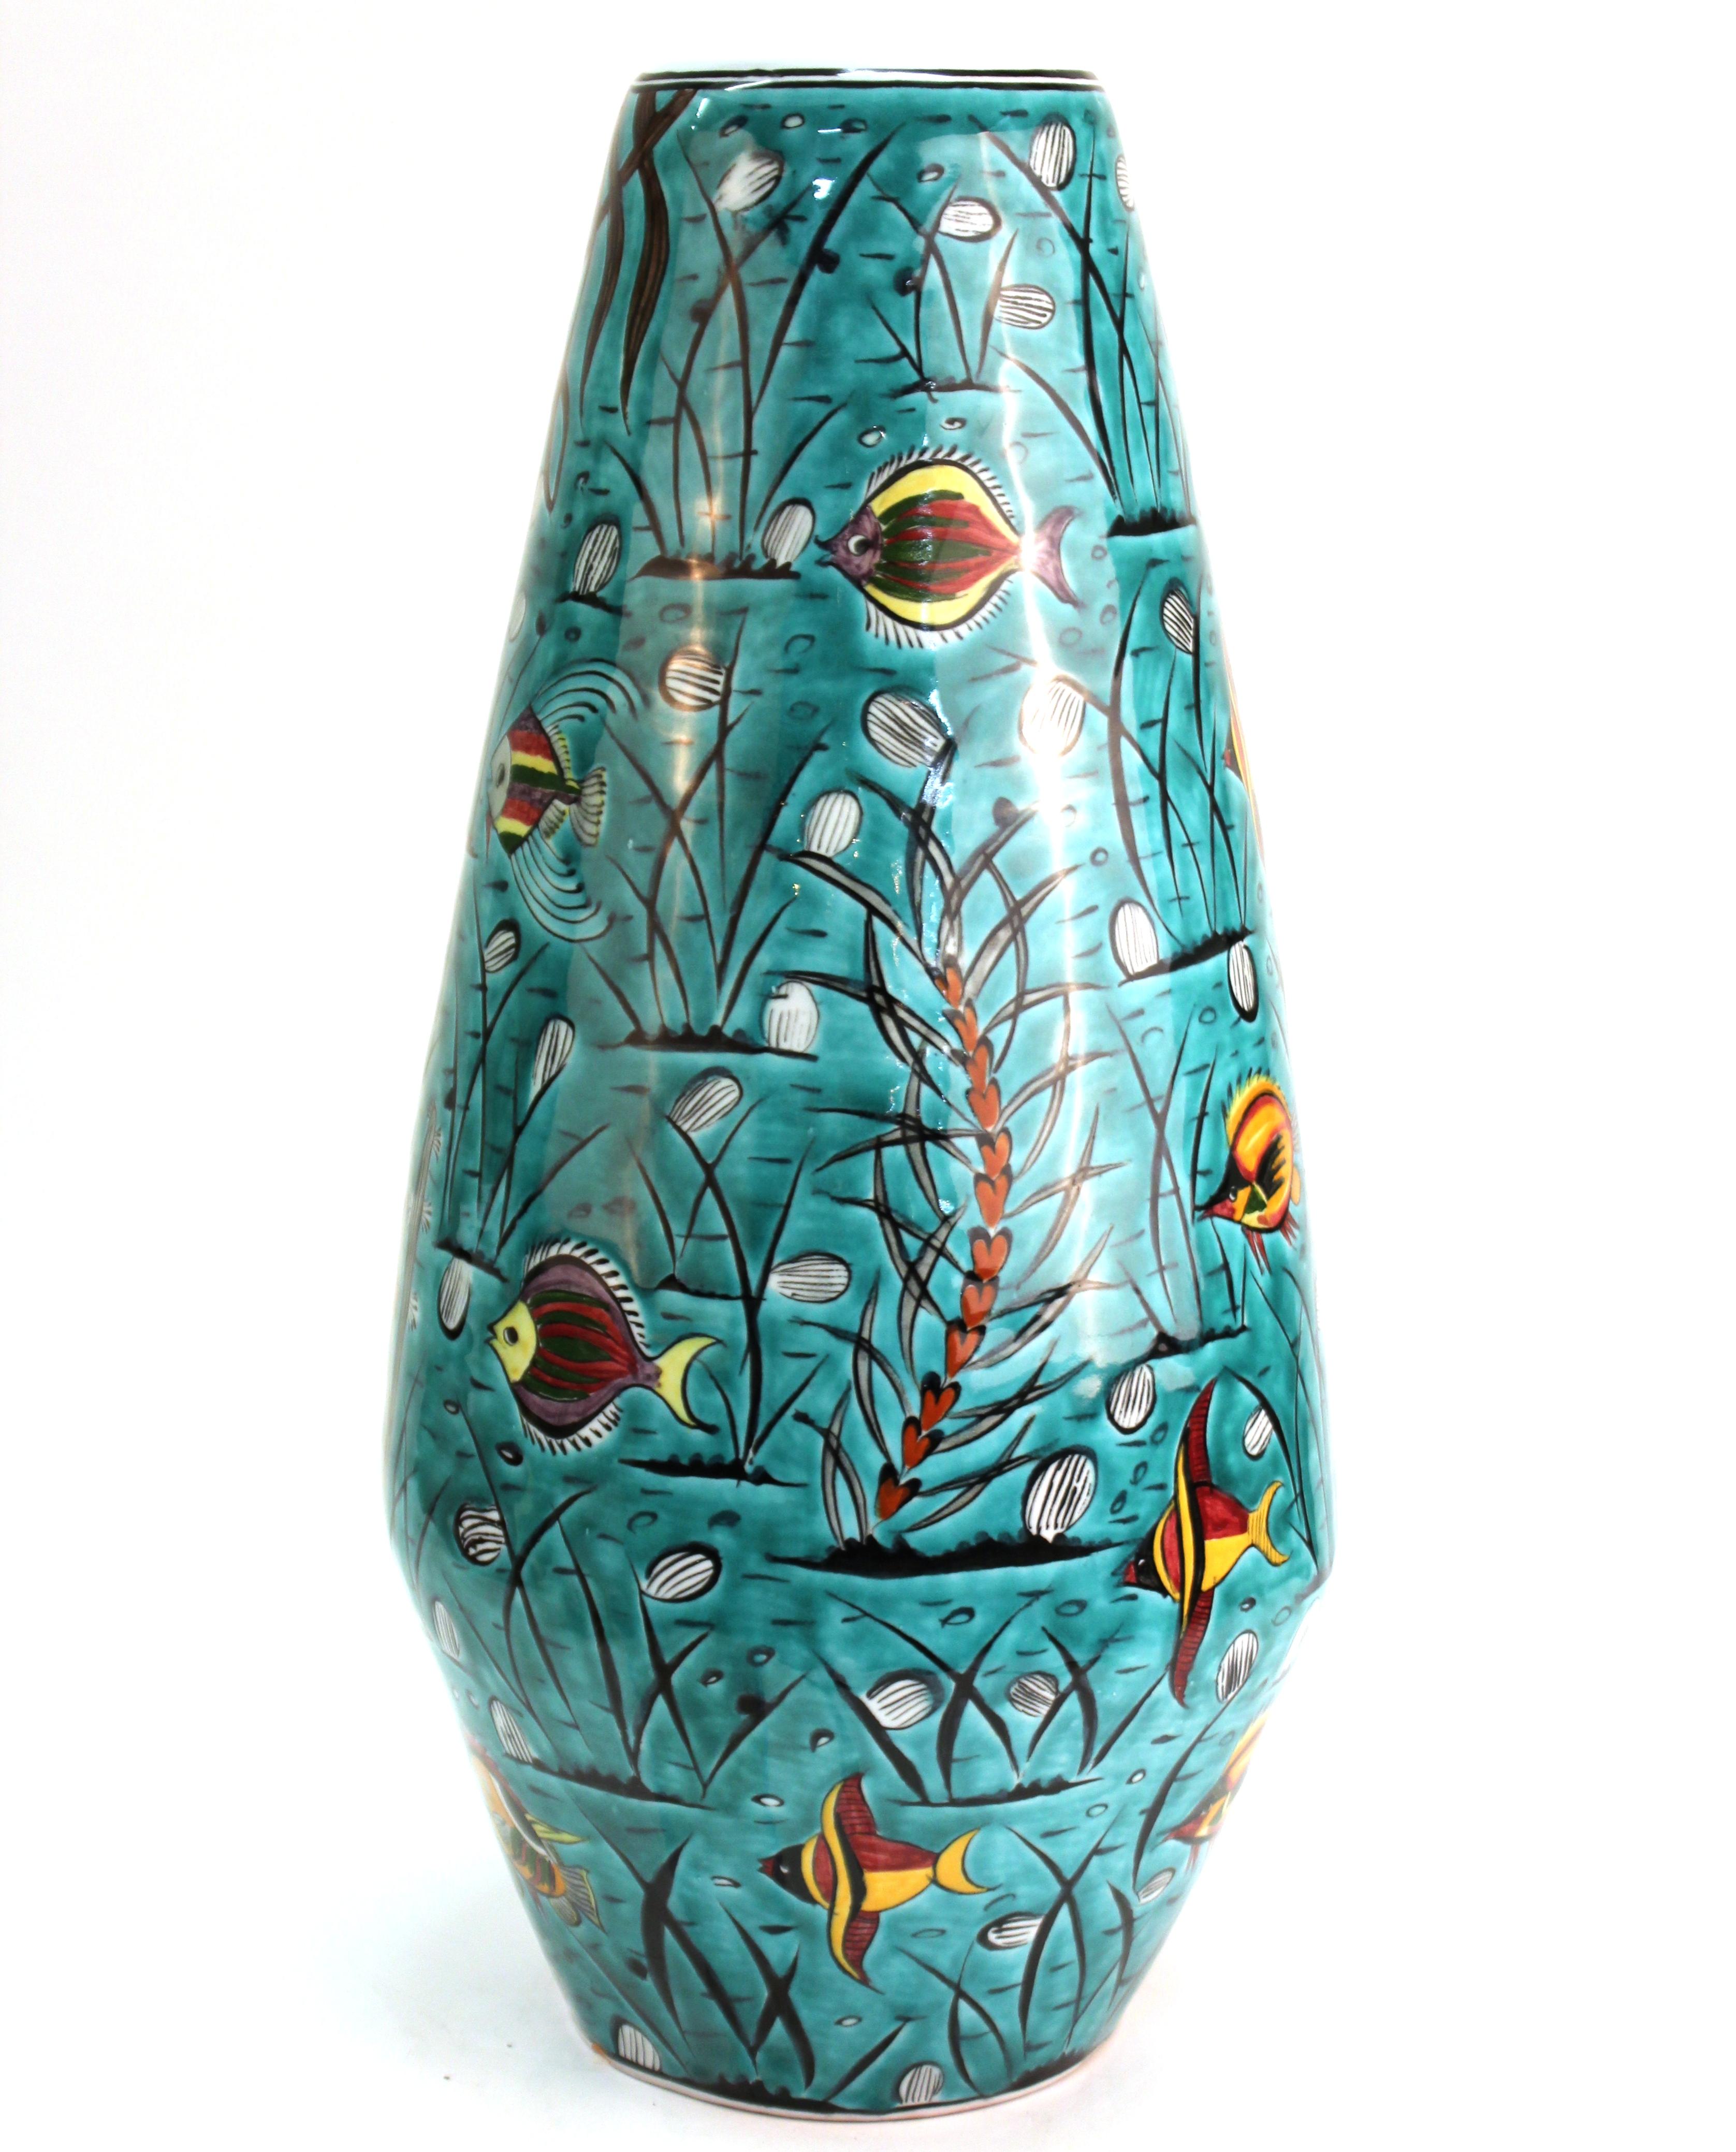 Greek Mid-Century Modern pottery vase with hand painted aquatic theme featuring fish and water plants. The piece is signed on the bottom 